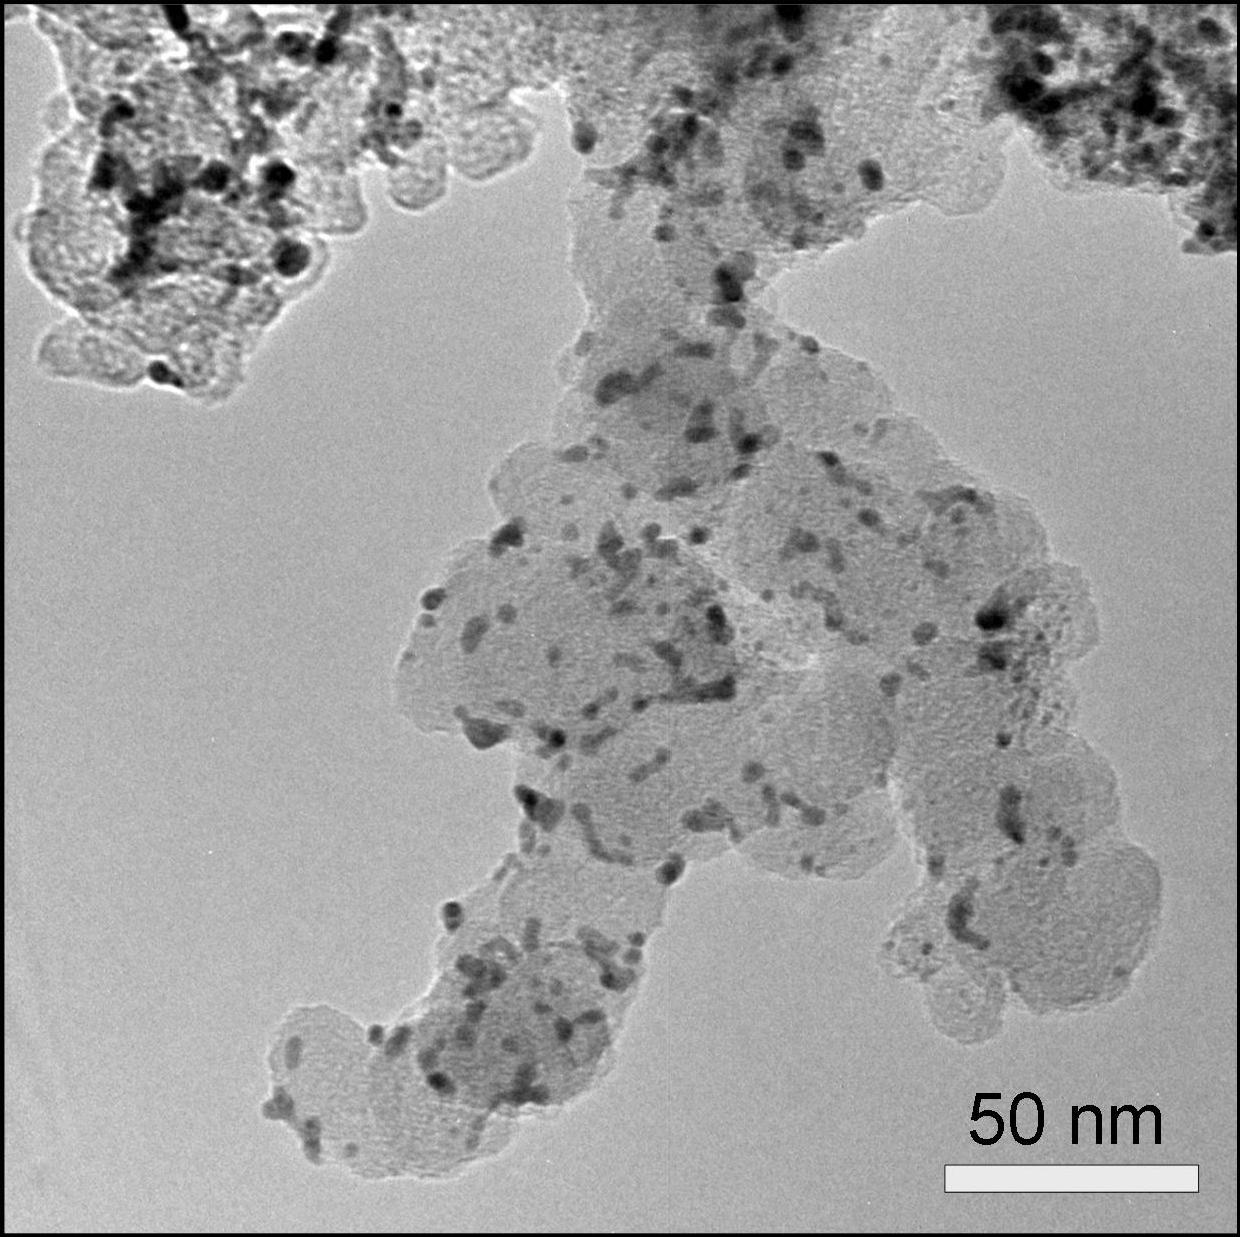 Transmission Electron Microscopy of Catalyst Material